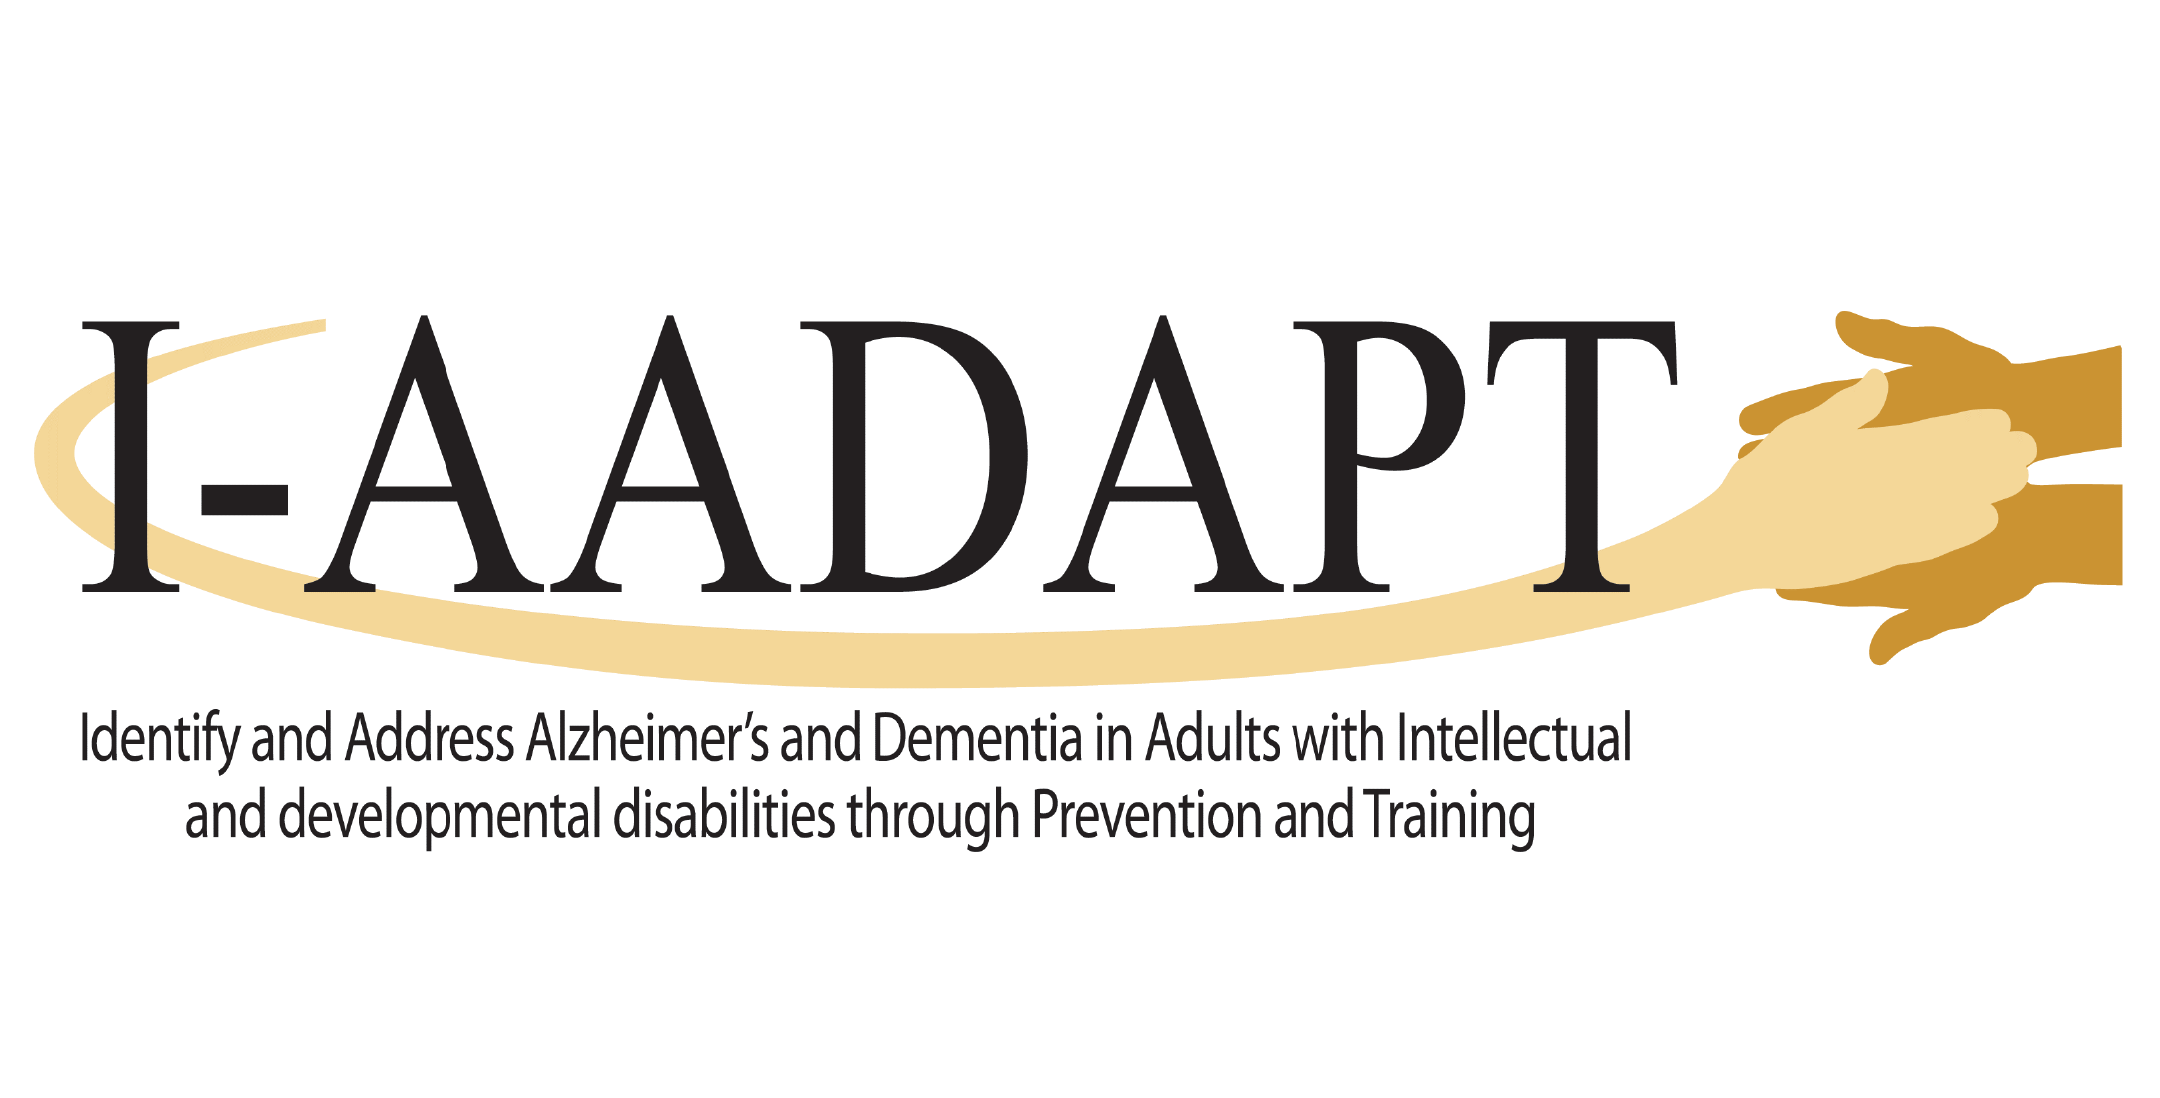 I-AADAPT Workshop: Dementia Capable Care for Adults with IDD